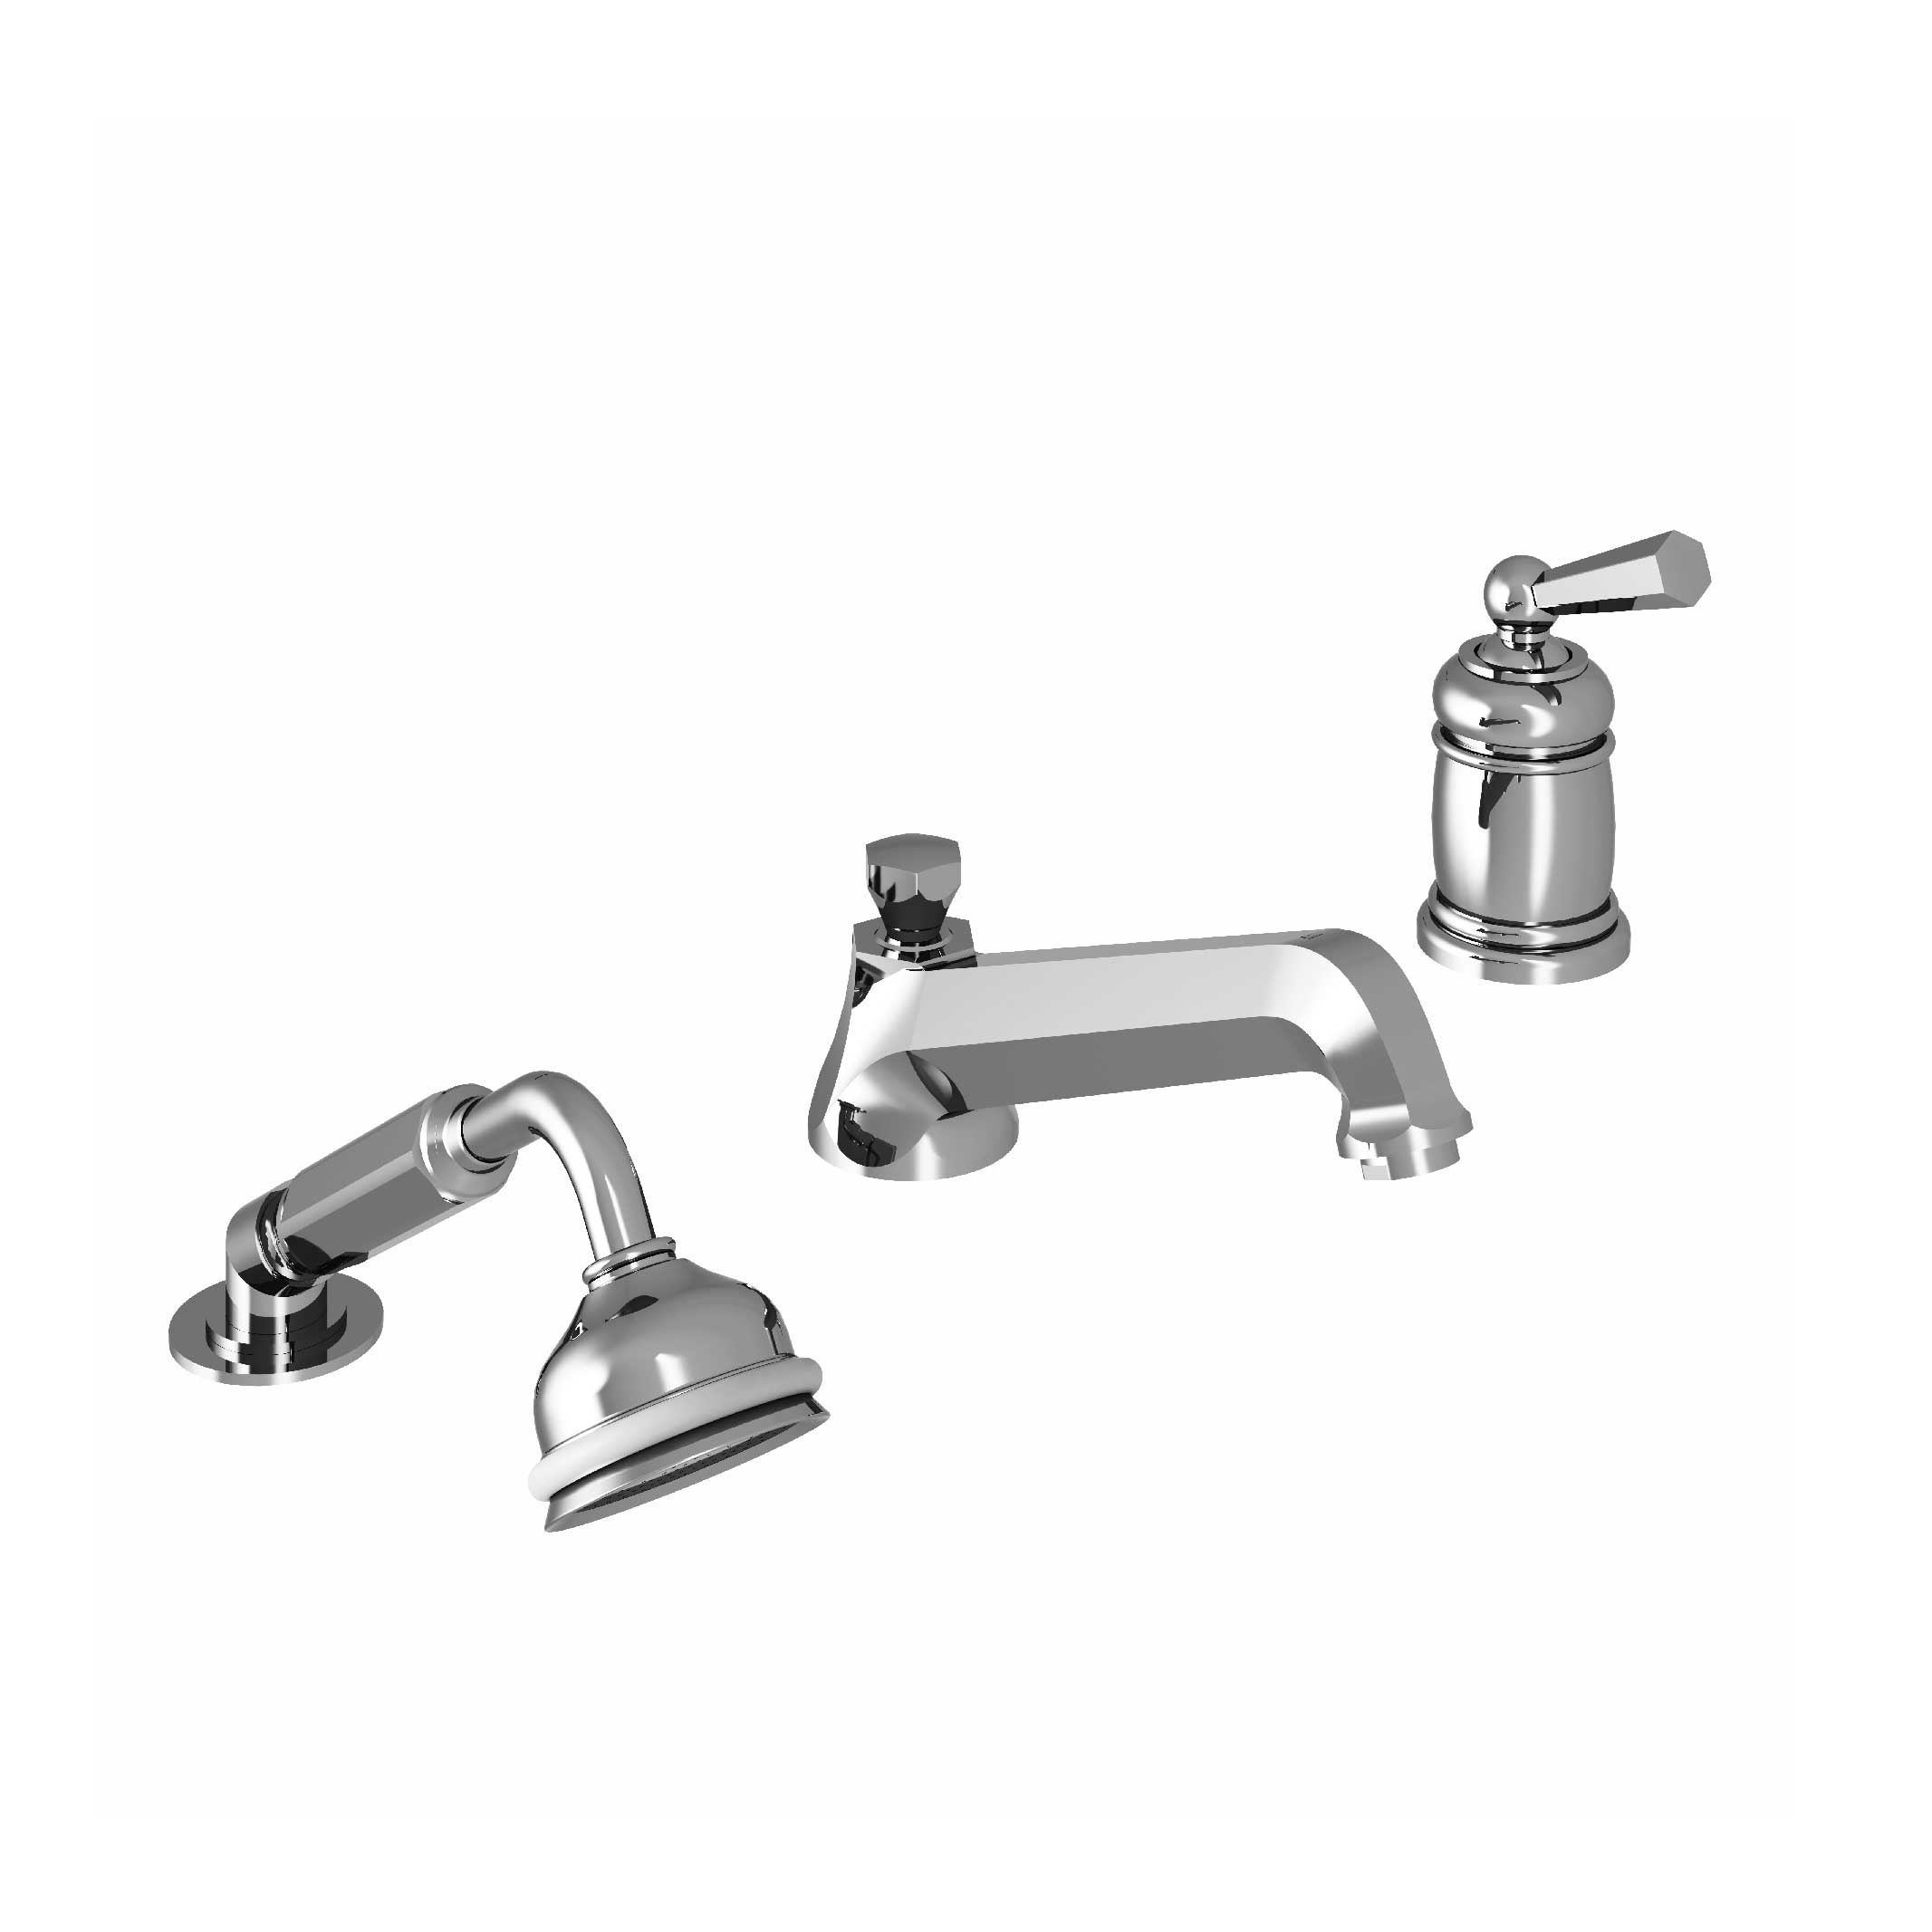 M39-3301M 3-hole single-lever bath and shower mixer